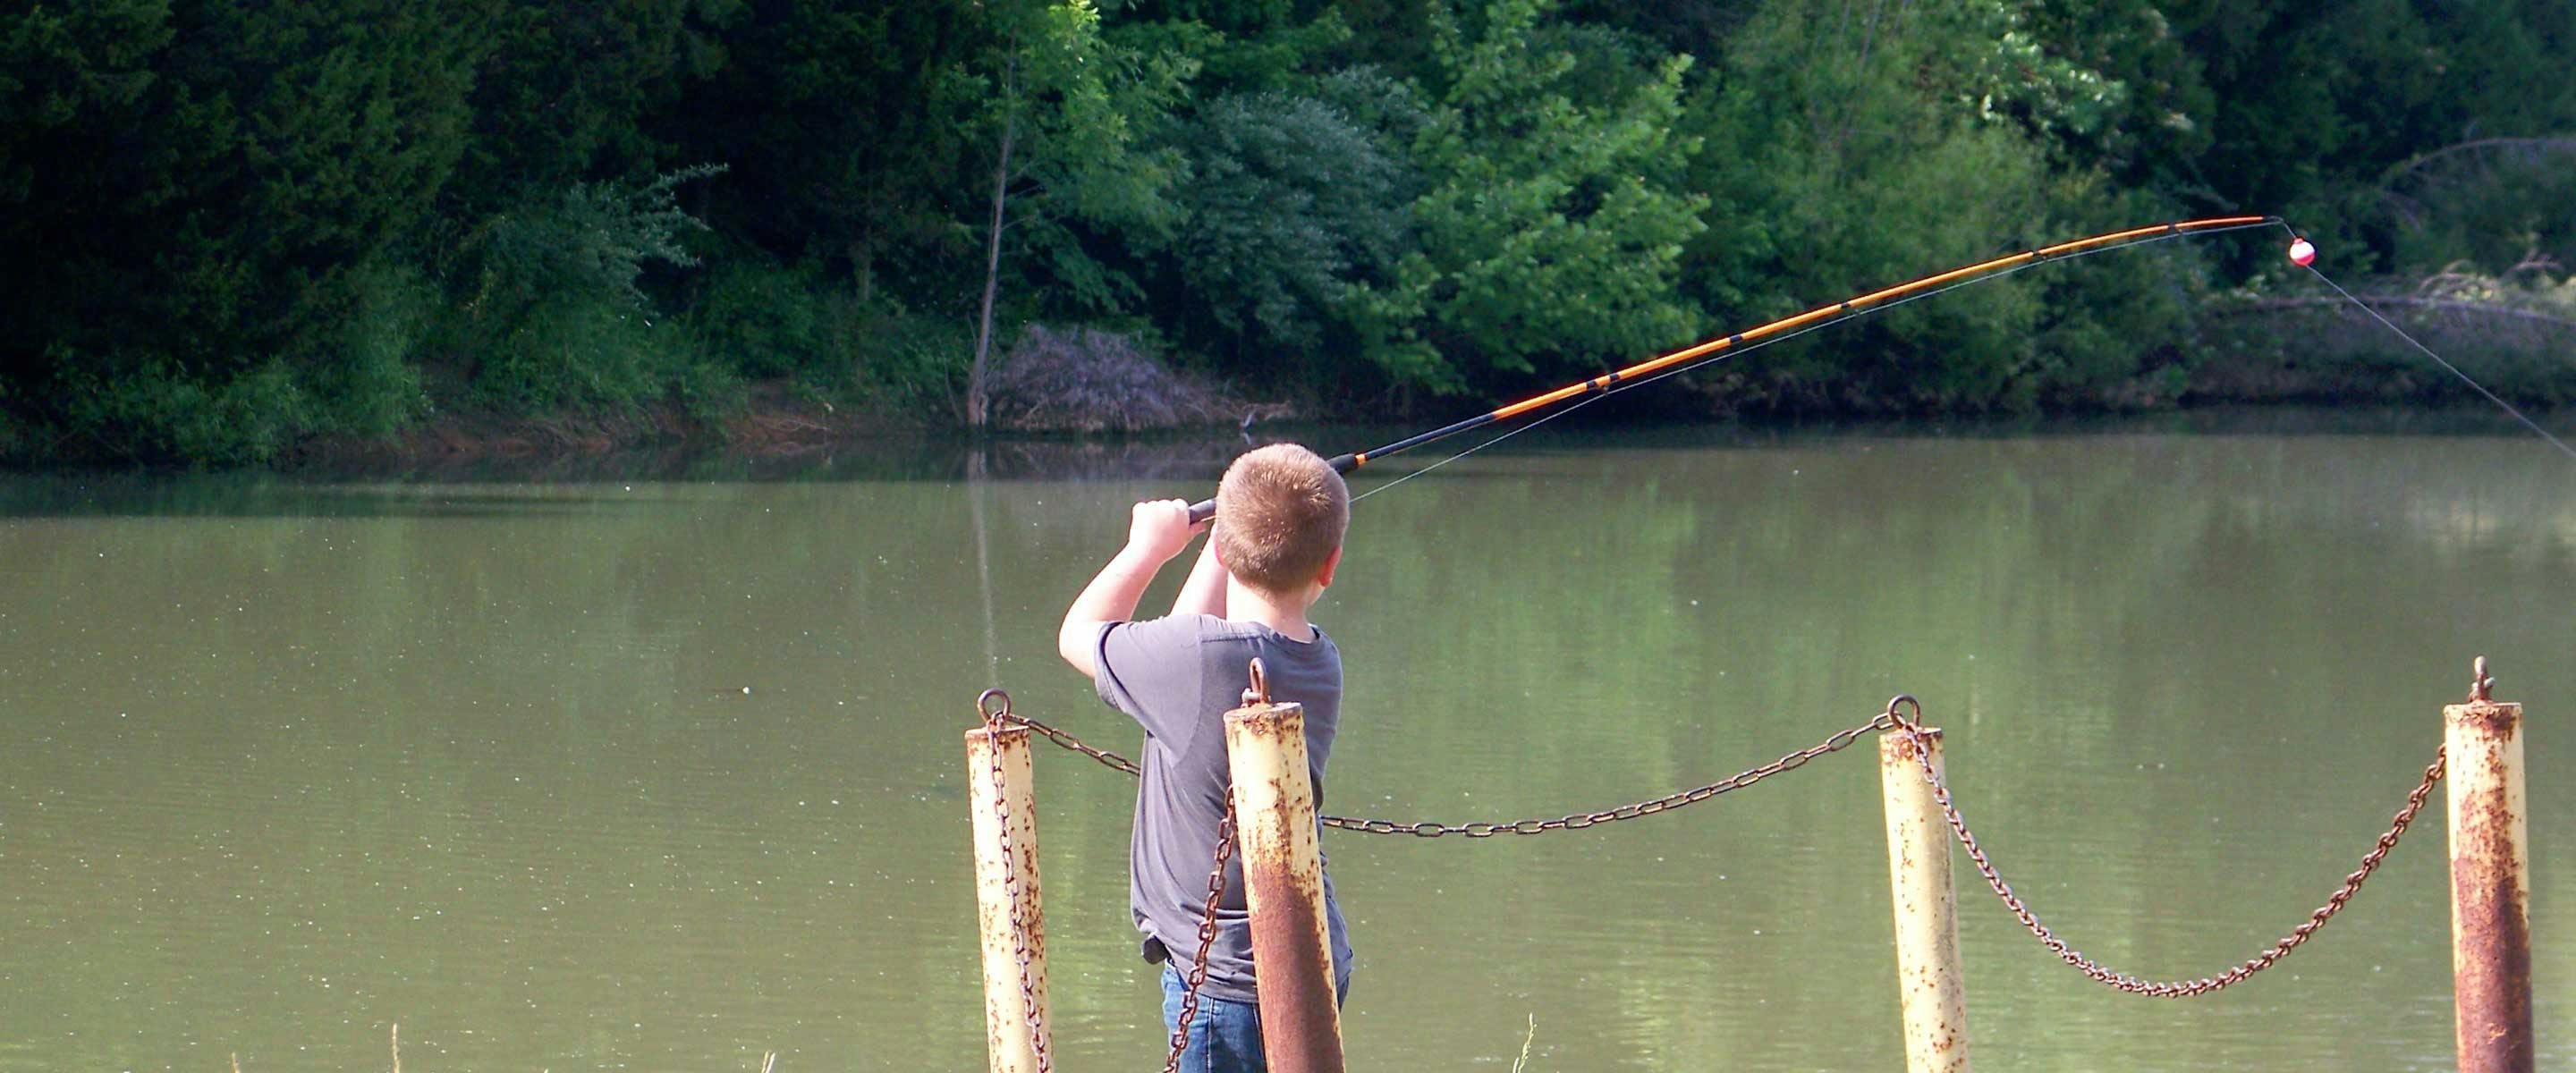 boy casting out into water to fish